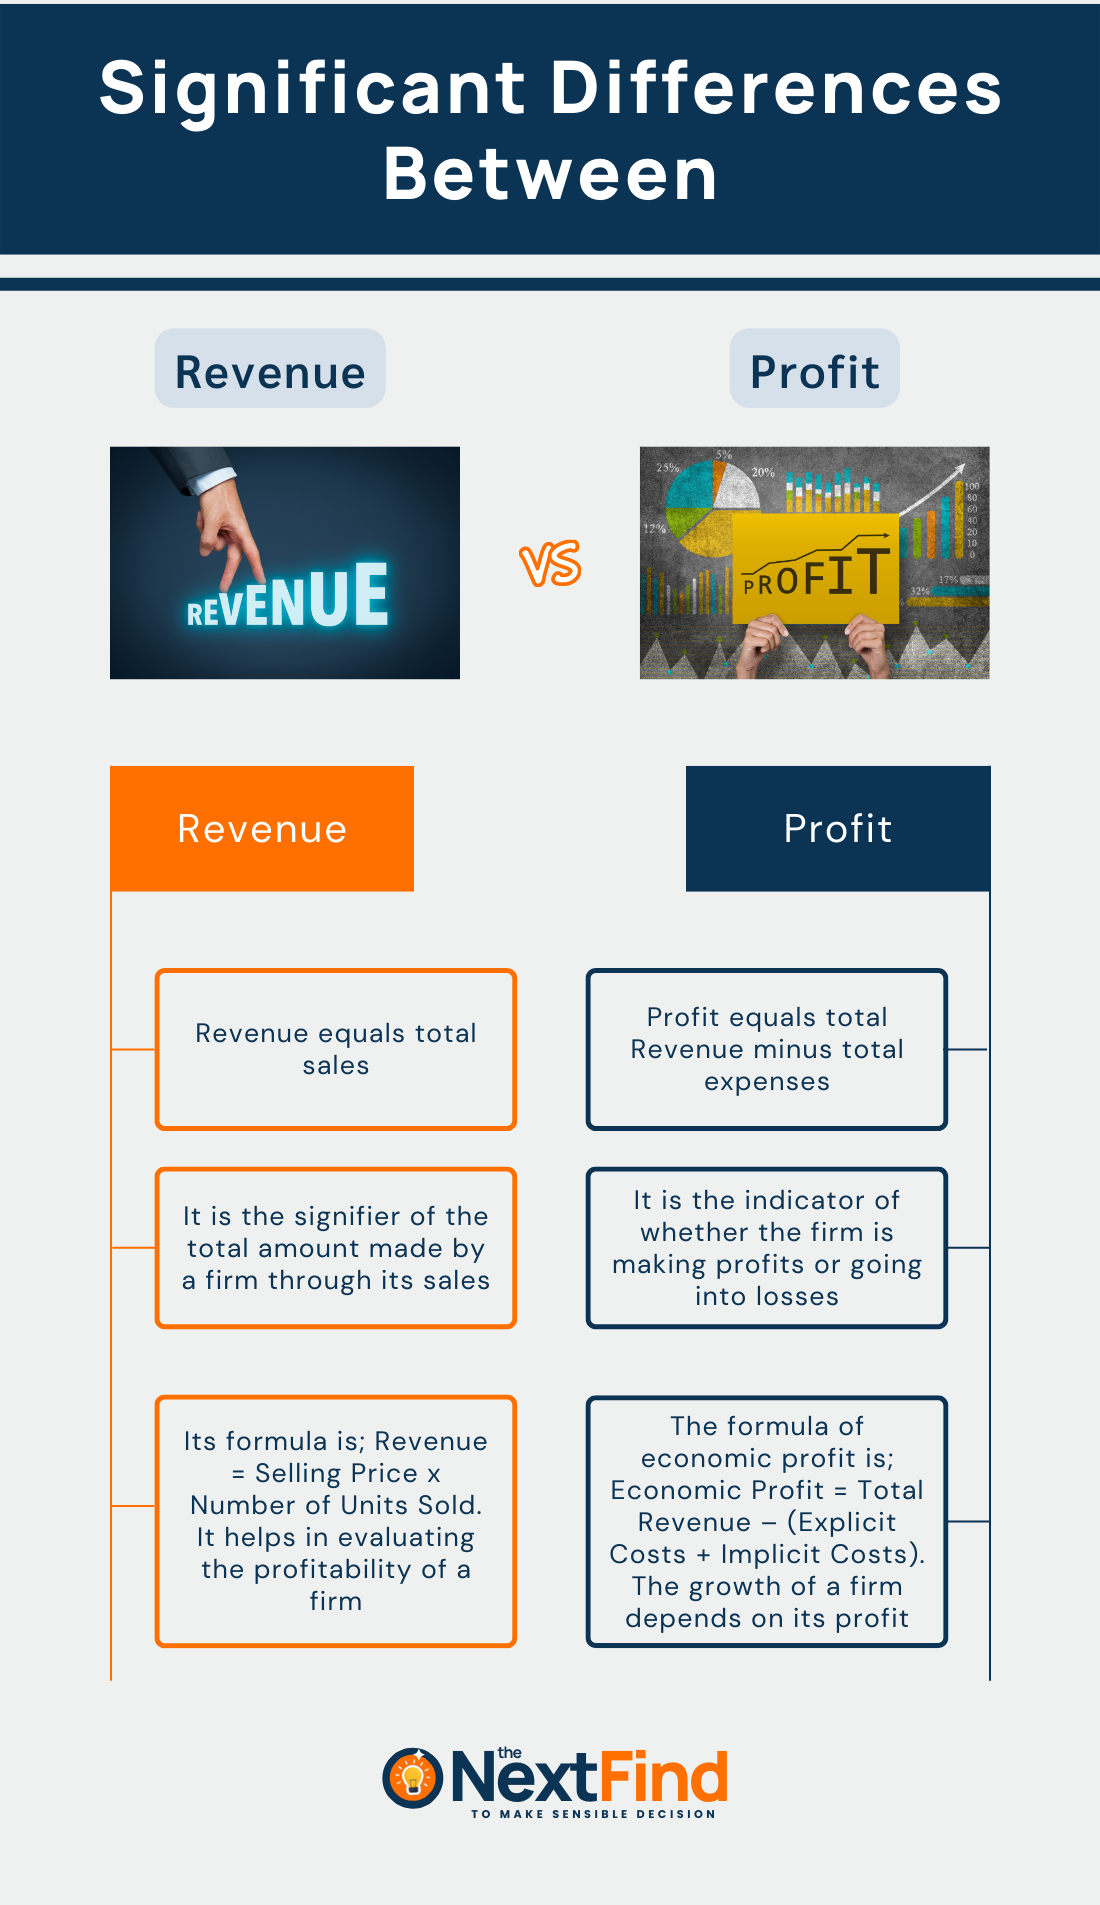 Significant Differences Between Revenue And Profit